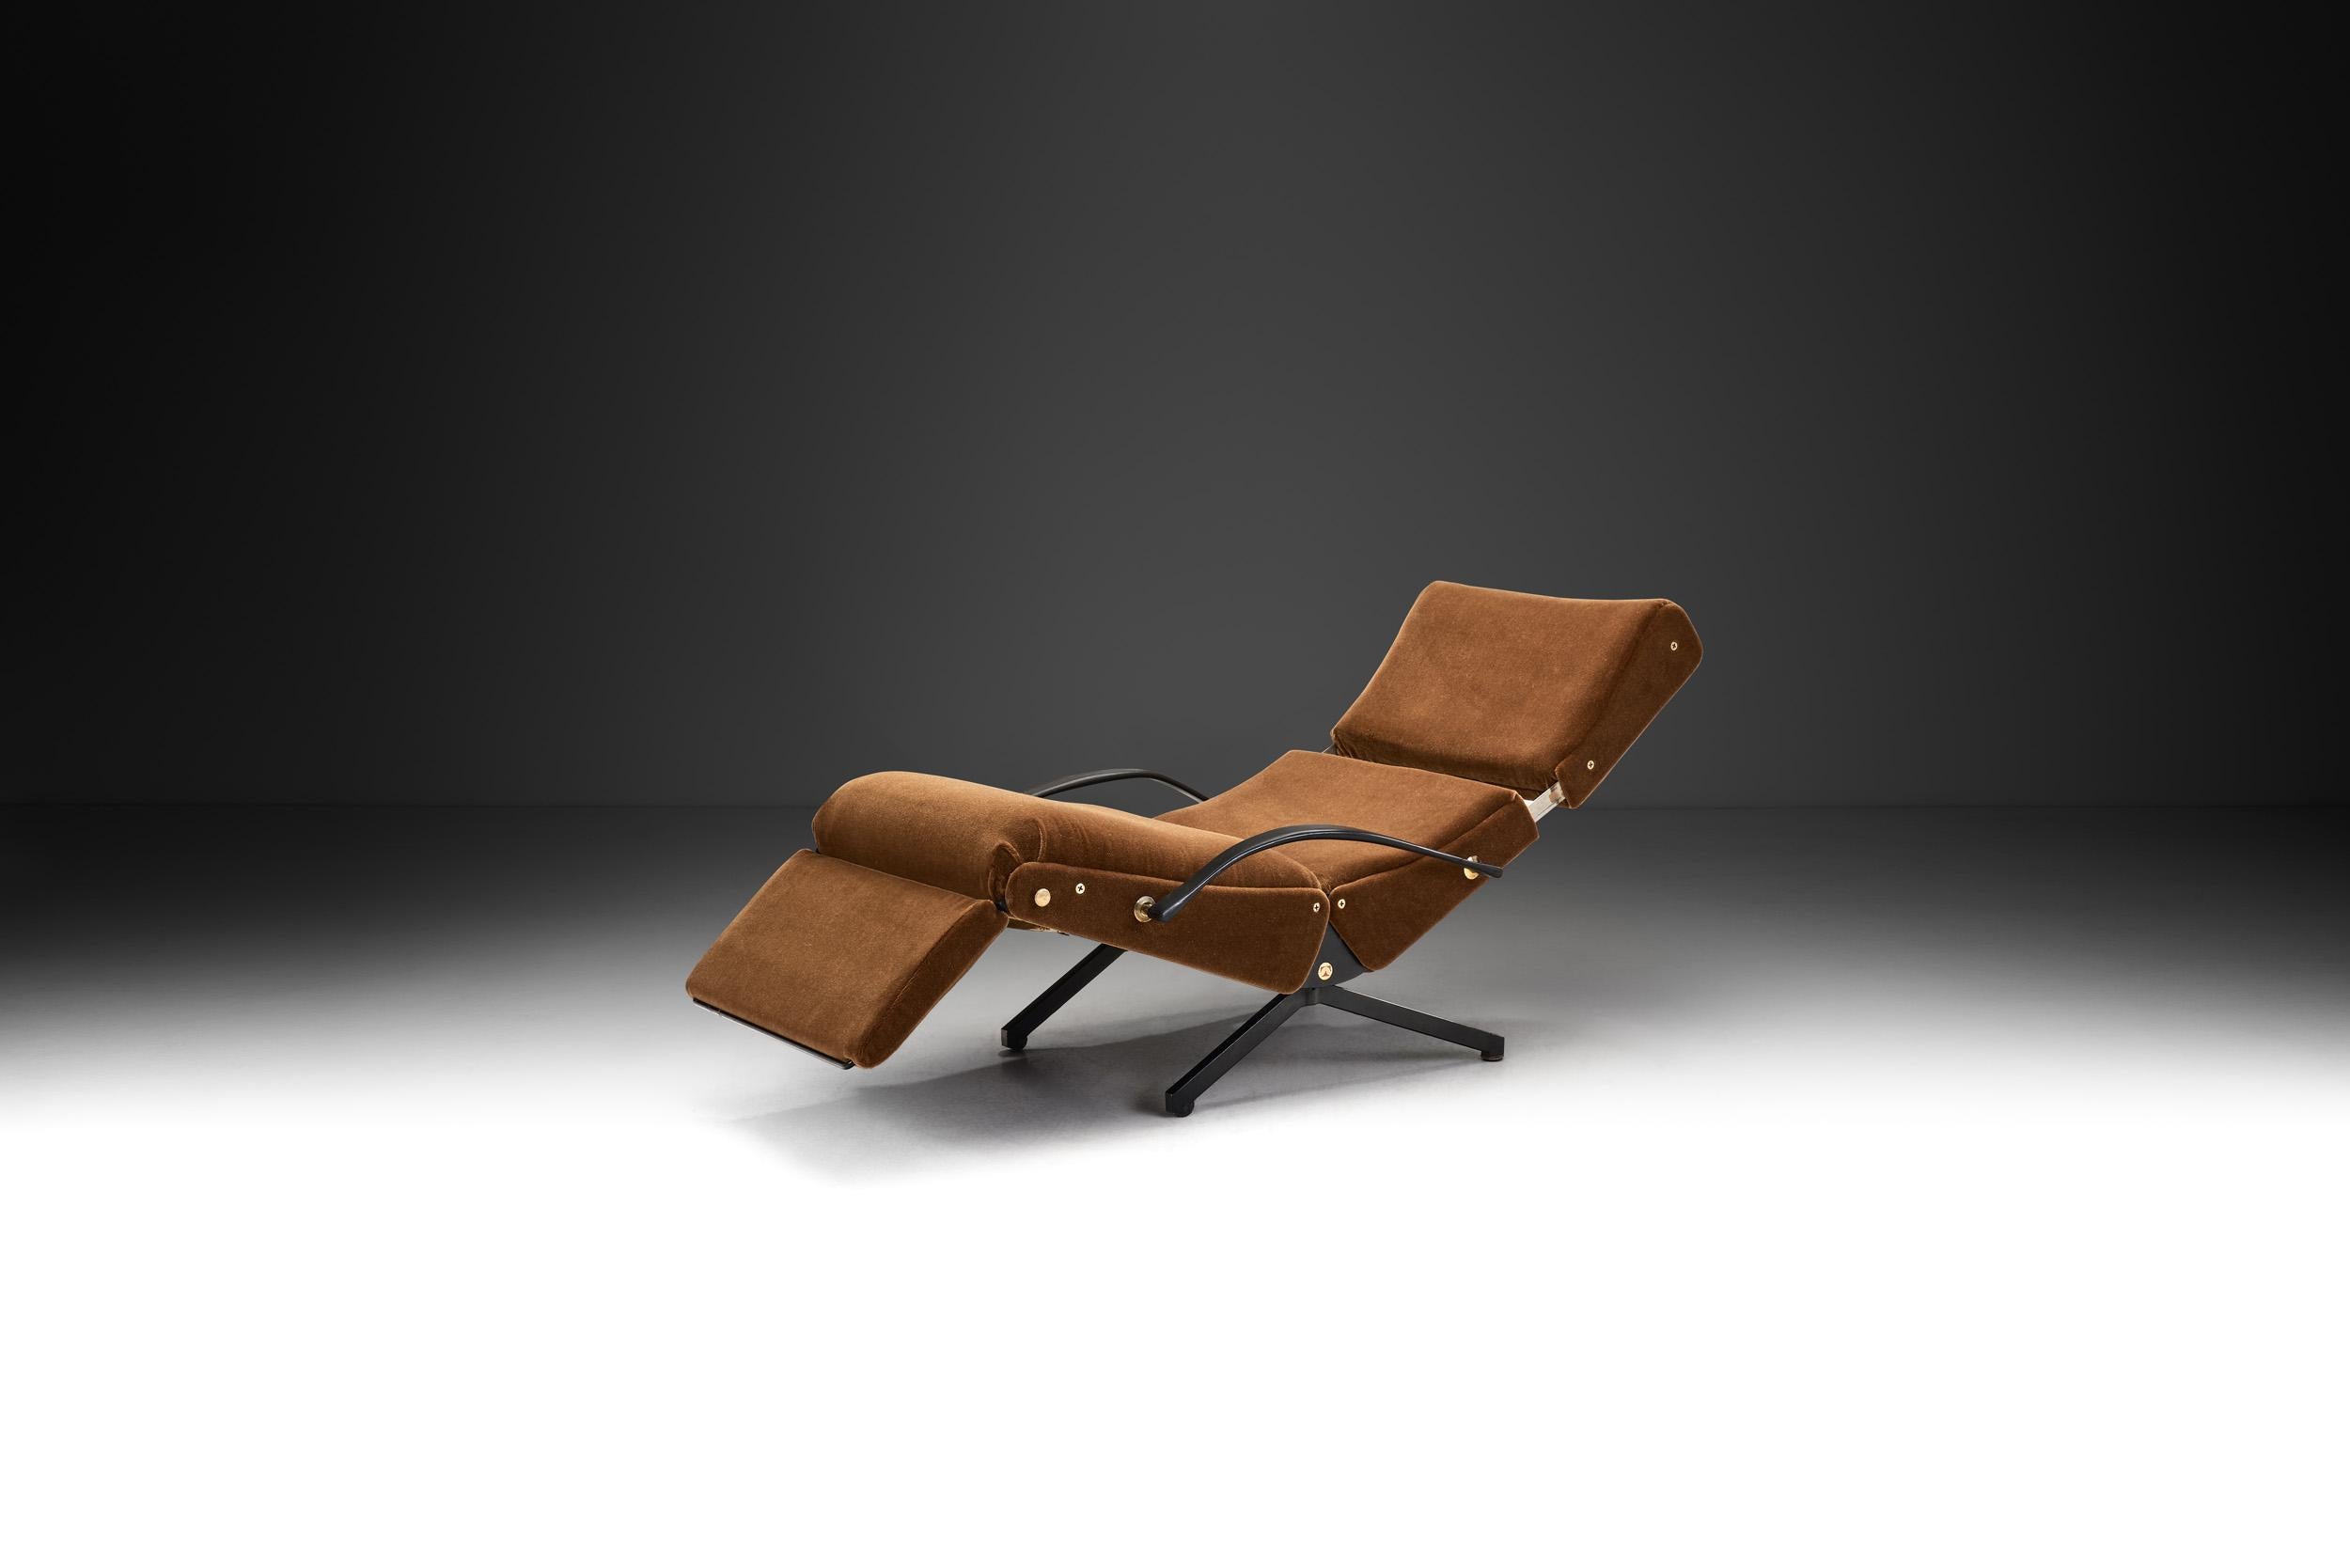 The P40, designed in 1955, is not only the most famous design of Italian architect and designer, Osvaldo Borsani, but of Italian mid-century design as well. This model is part of the most well renowned design collections around the world, including